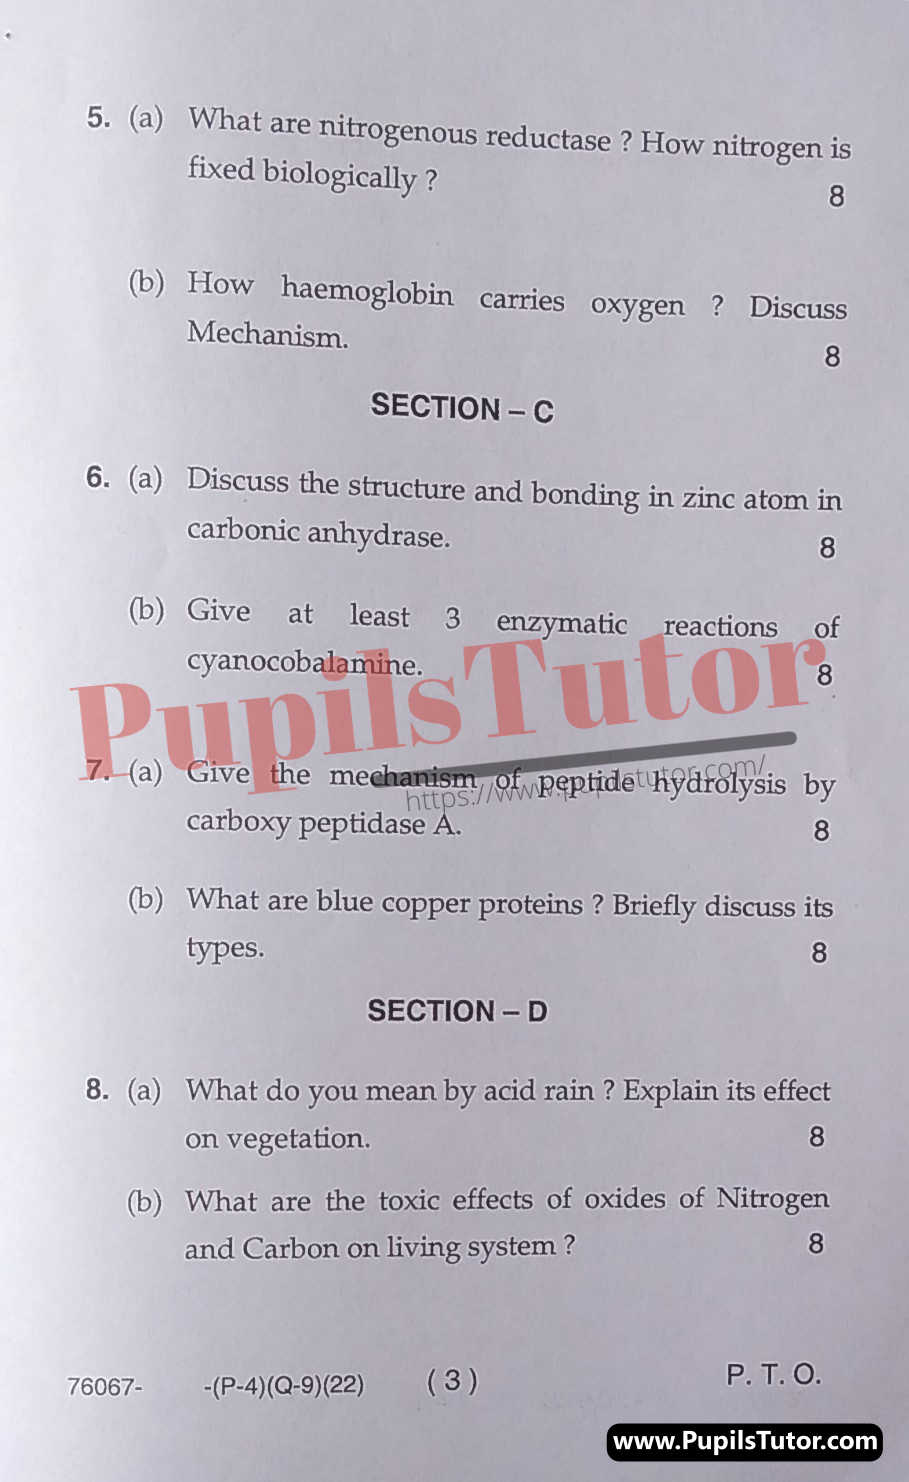 Free Download PDF Of M.D. University M.Sc. [Chemistry] Third Semester Latest Question Paper For Inorganic Special-III Subject (Page 3) - https://www.pupilstutor.com